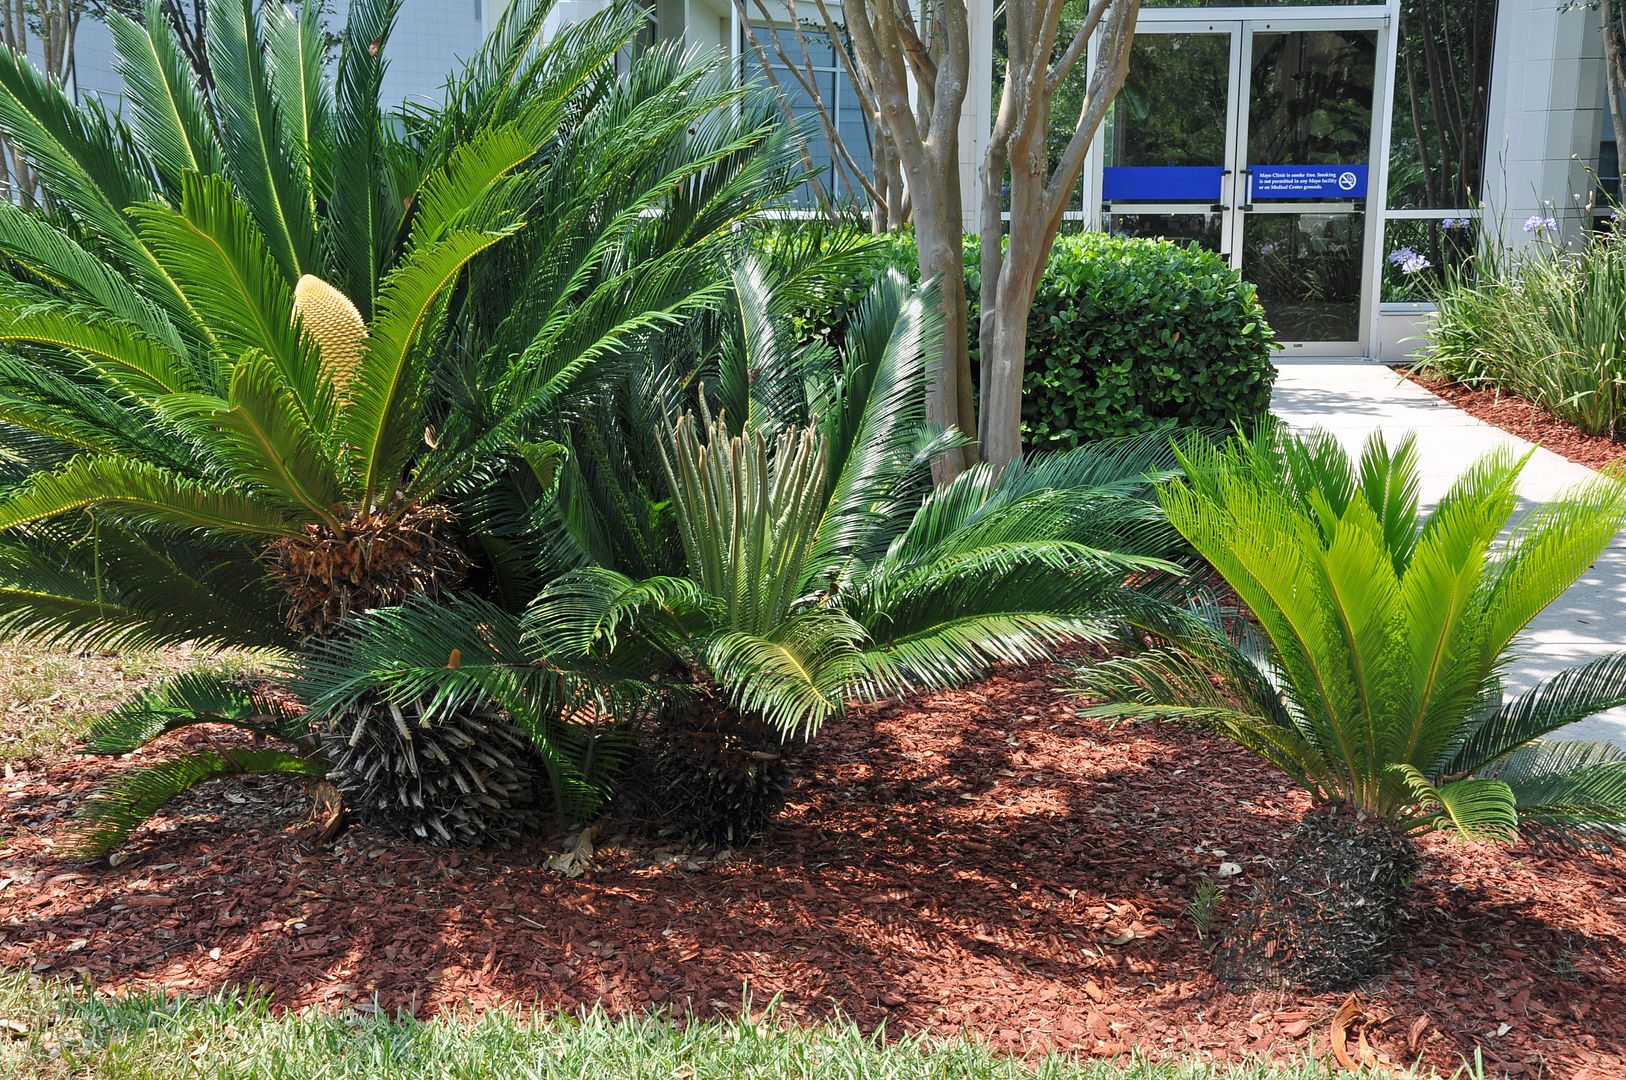 The Goat: The Sago Palm